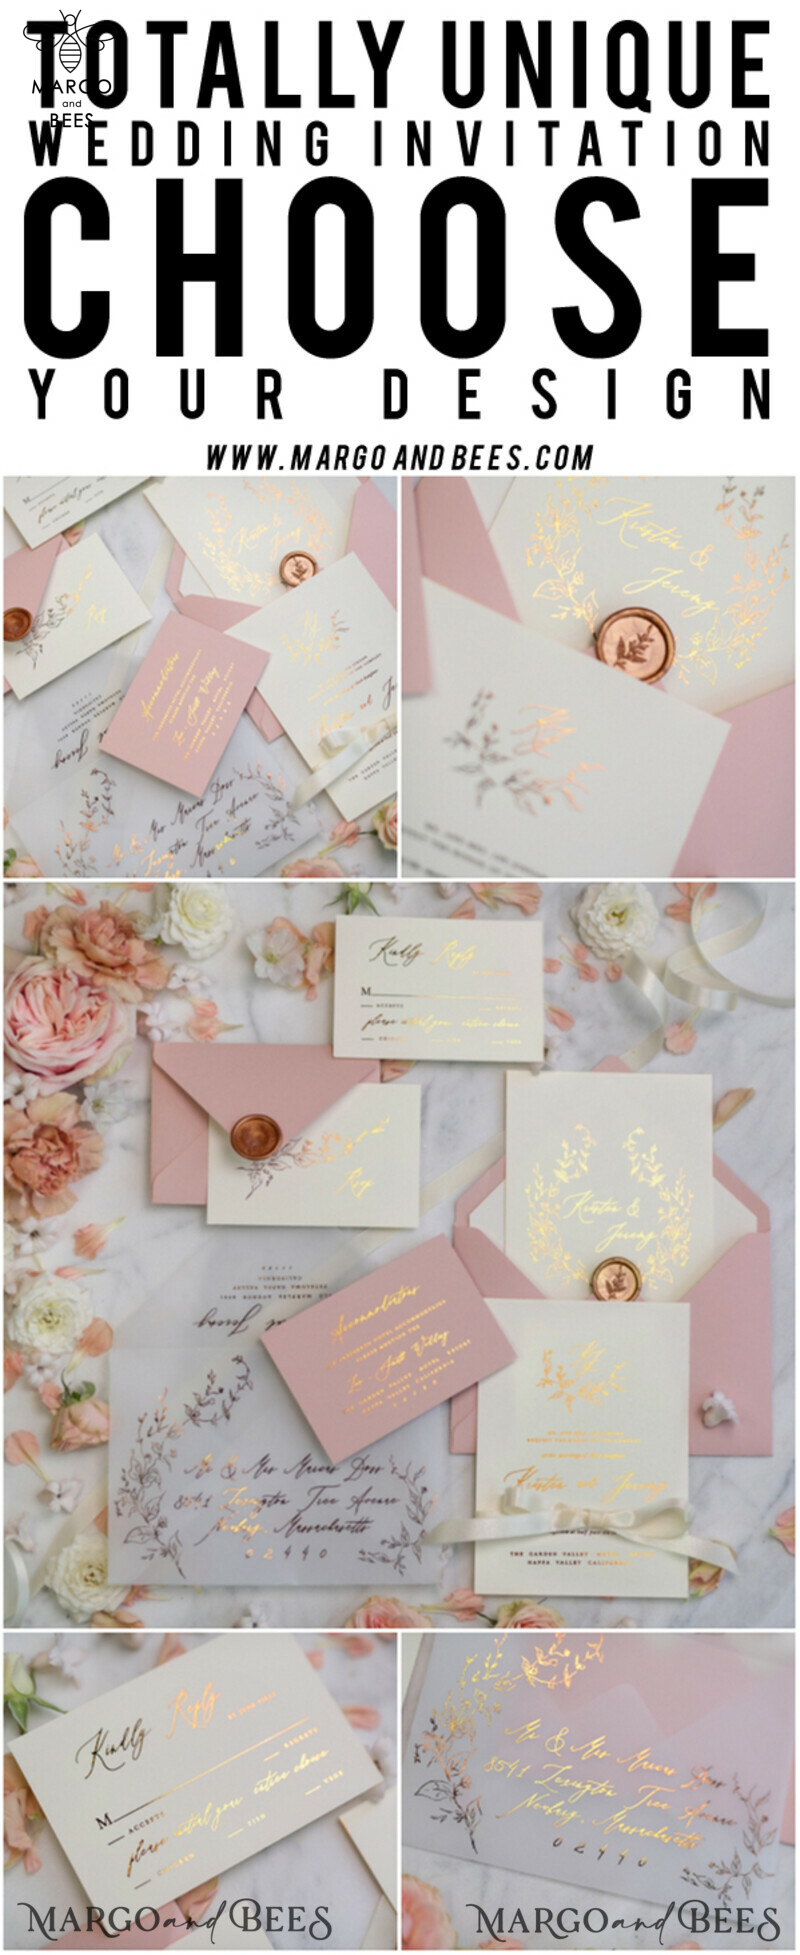 Stunning Blush Pink Wedding Invitations with Glamourous Gold Foil Accents and Elegant Vellum Details: A Bespoke Wedding Invitation Suite-37